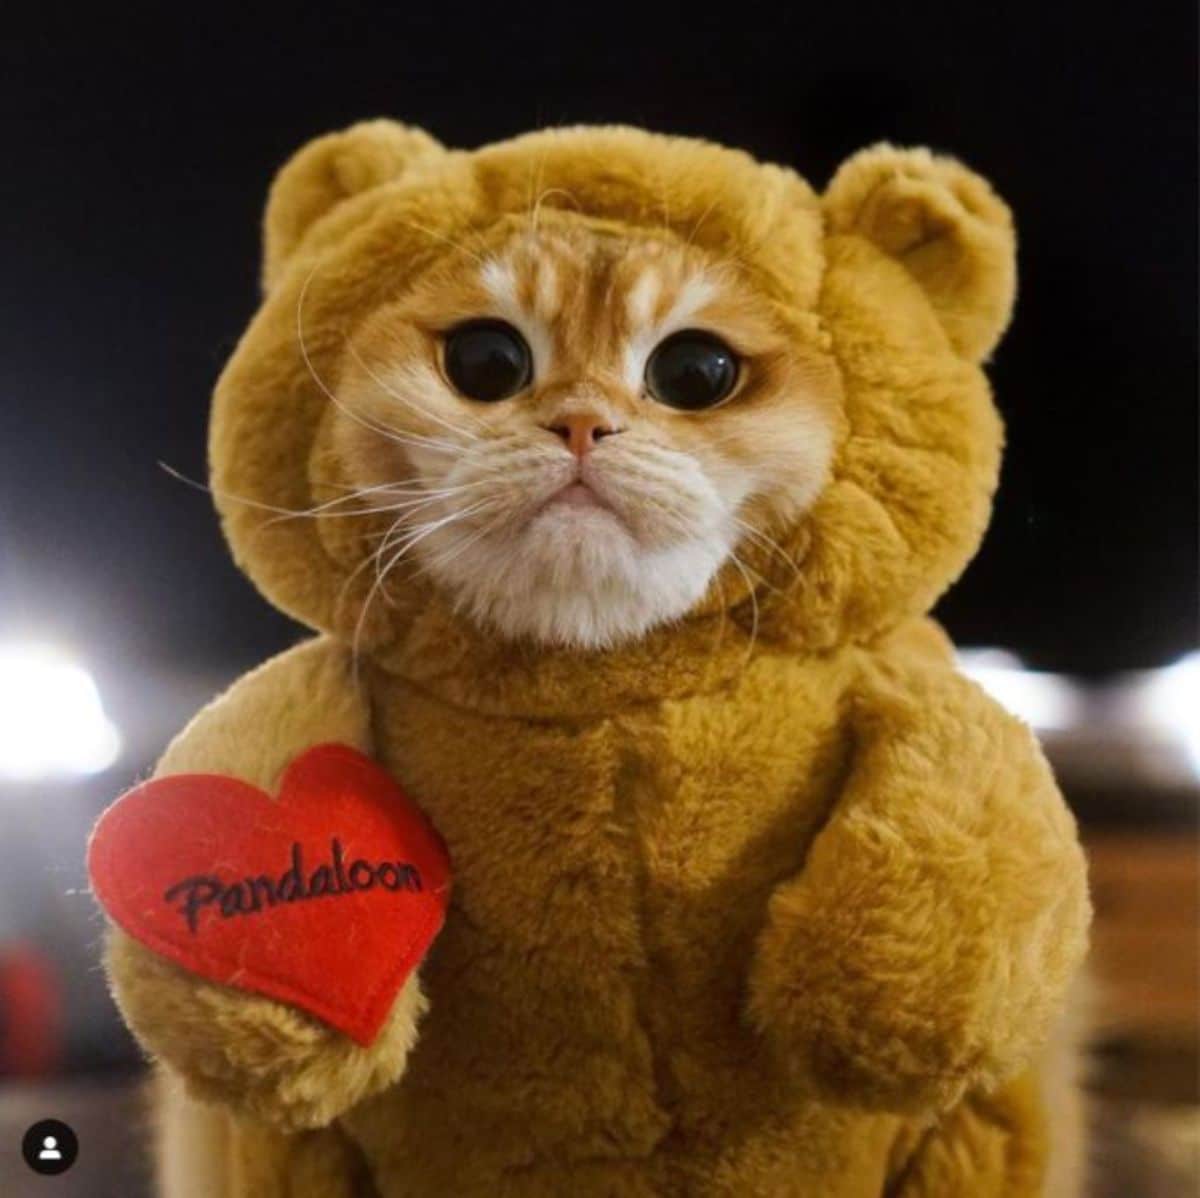 orange cat with large black eyes in a brown teddy bear outfit that has a red heart on the side